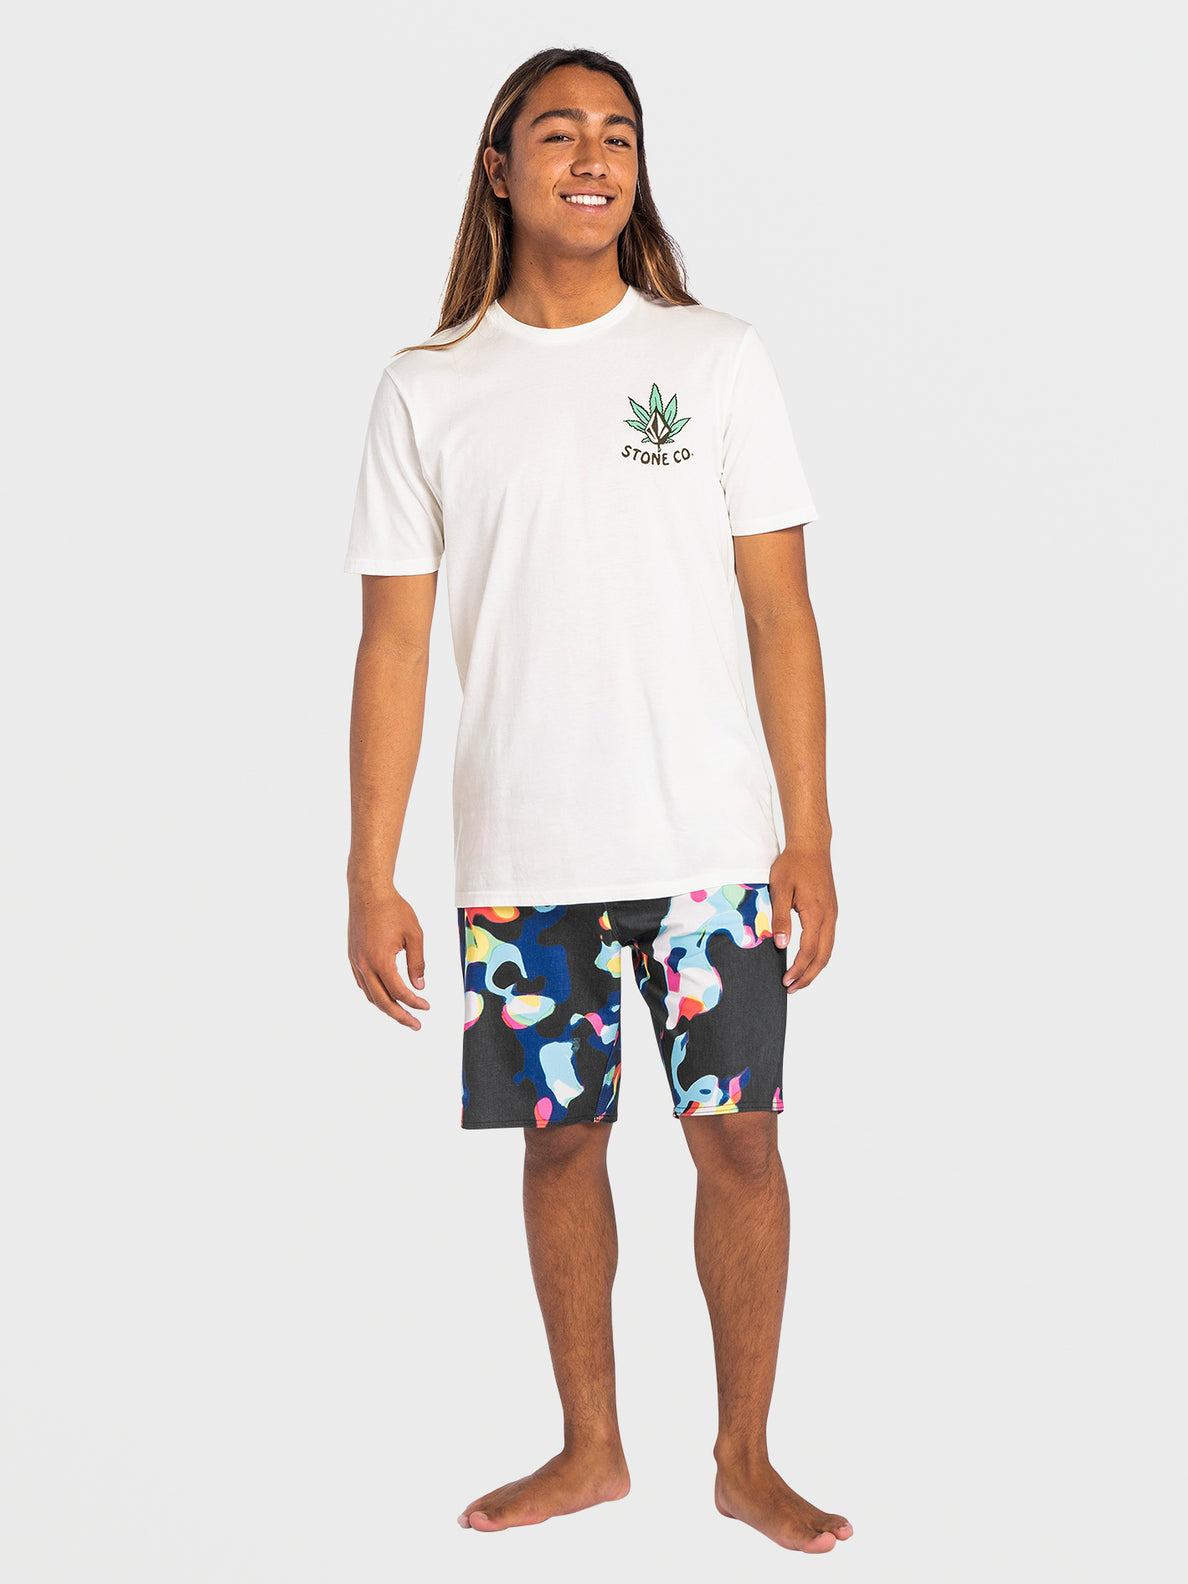 Saturate Stoney Trunks - Black (A0812202_BLK) [5]